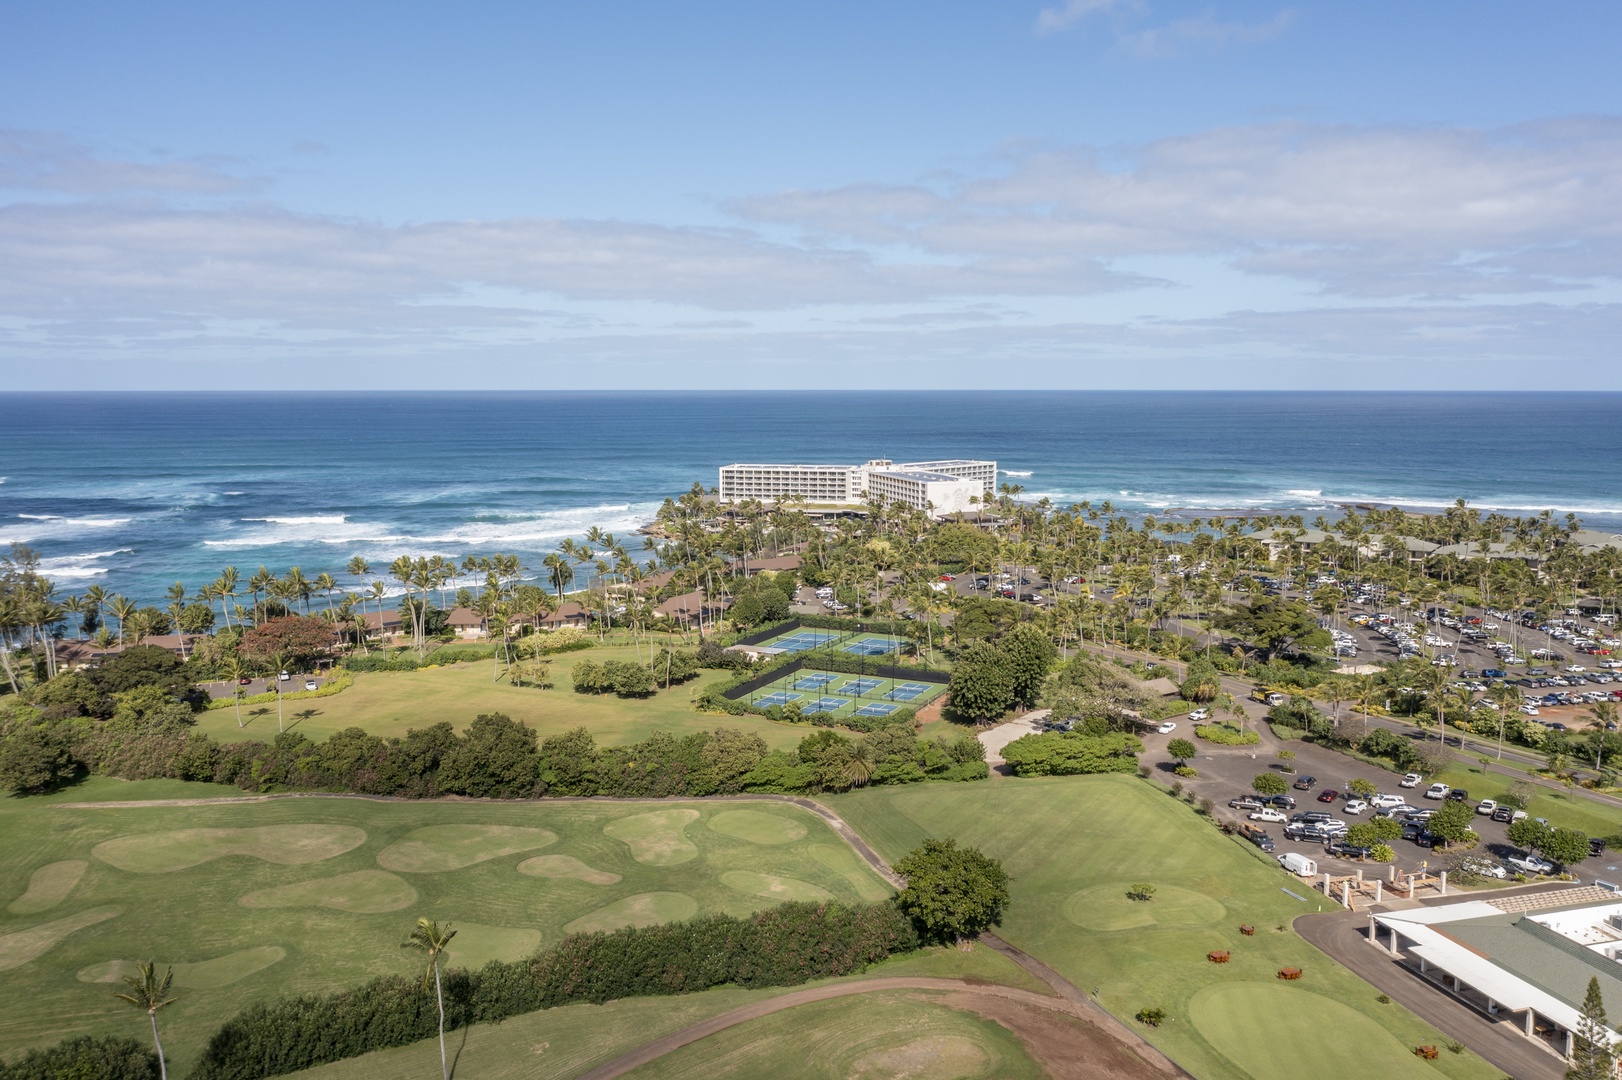 Kahuku Vacation Rentals, Kuilima Estates West #120 - Aerial view of the Turtle Bay Resort; Kuilima Condos are adjacent to the Resort Golf Course